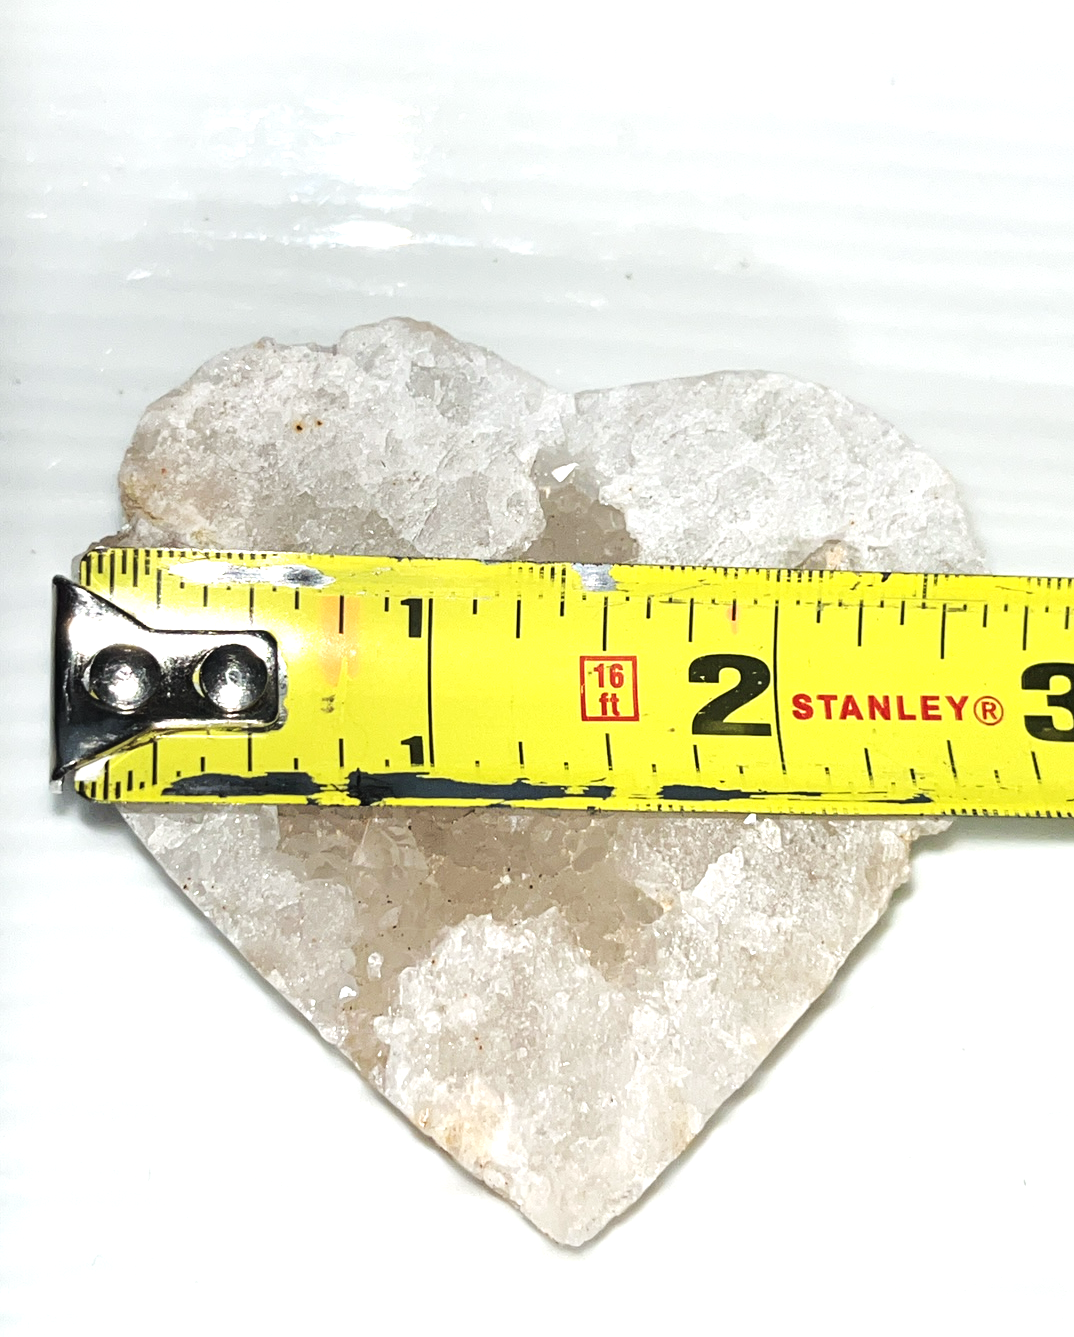 Natural Quartz druzy Geode heart specimens with sparkling Quartz points inside these hearts with rainbow flash inclusions